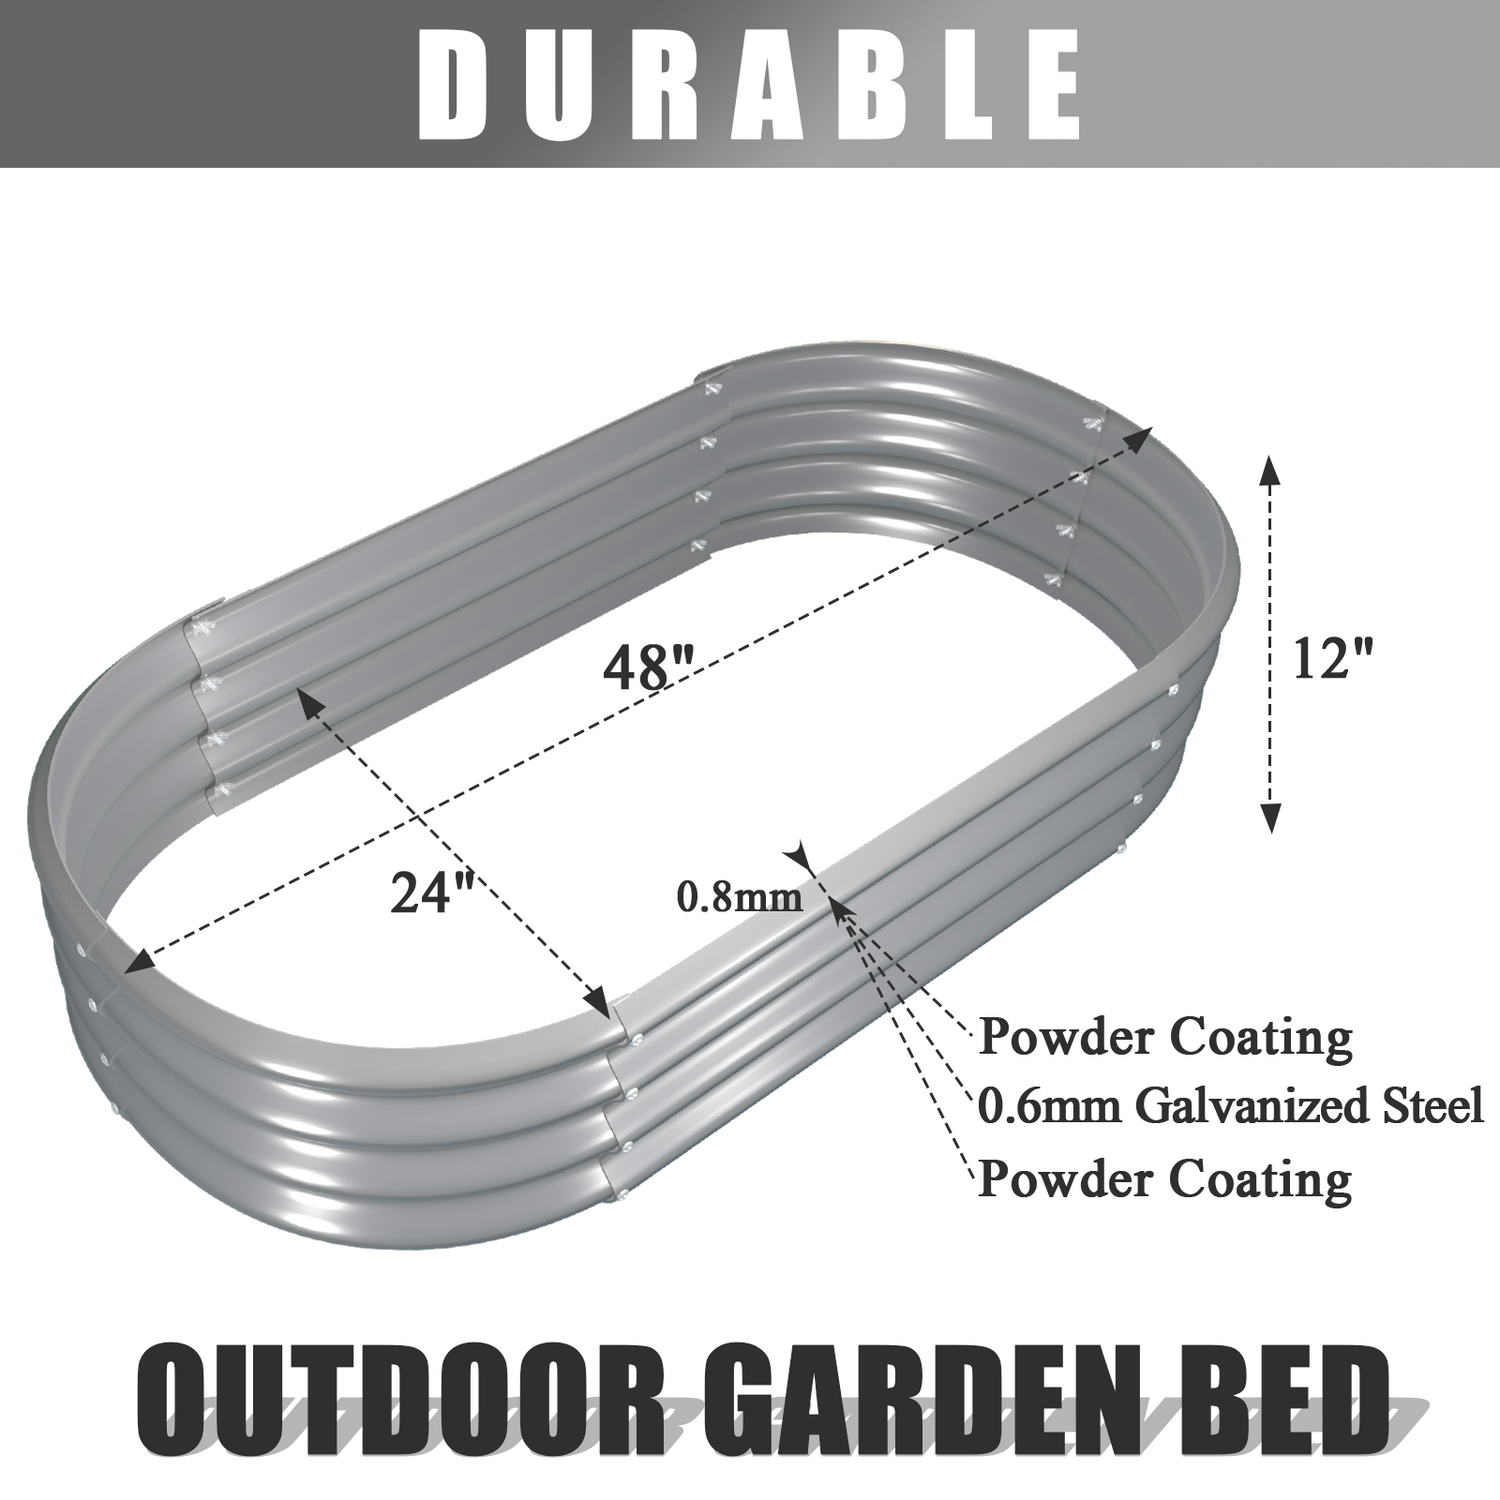 Bundle of 8 | 12" Tall 4x2ft Oval Metal Raised Garden Beds